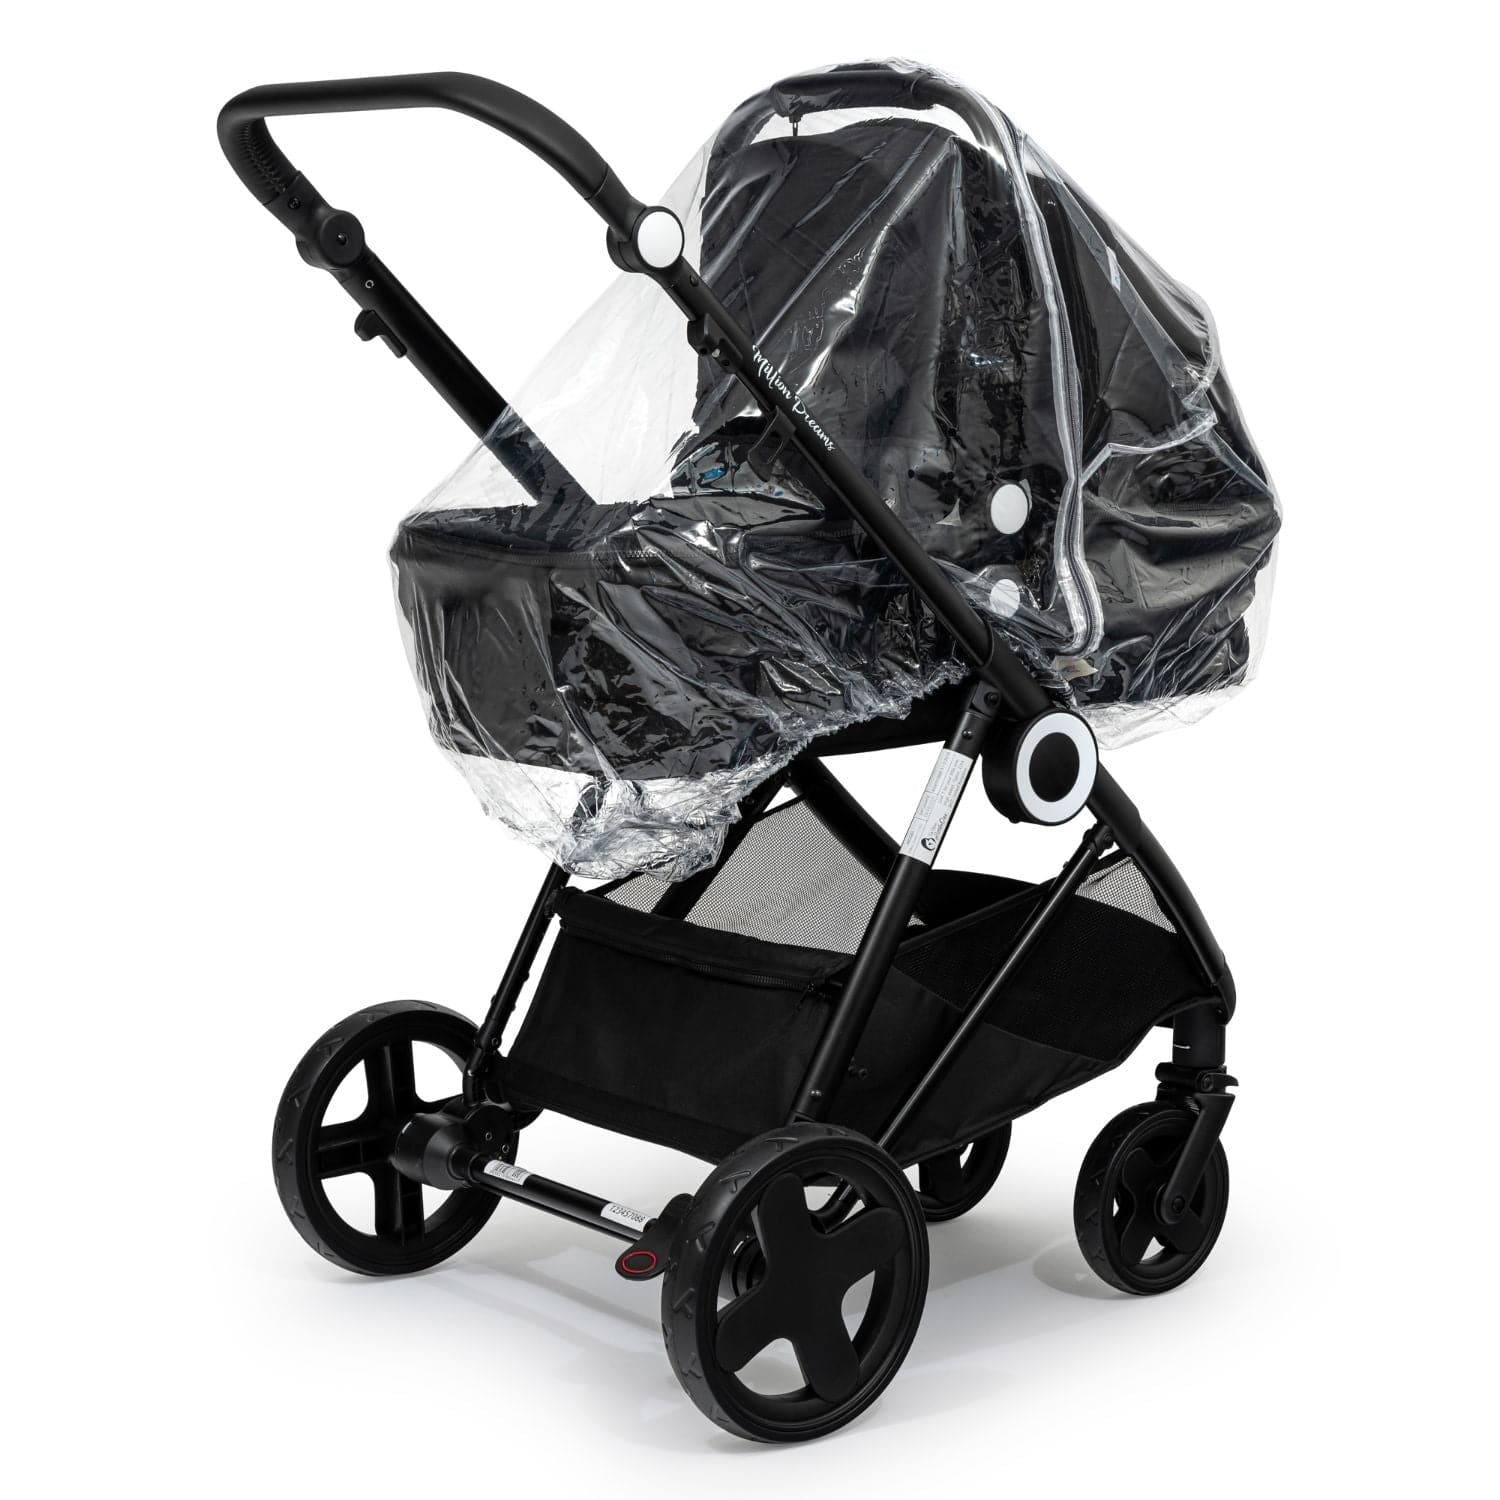 Carrycot Raincover Compatible With Hybrid - Fits All Models - For Your Little One